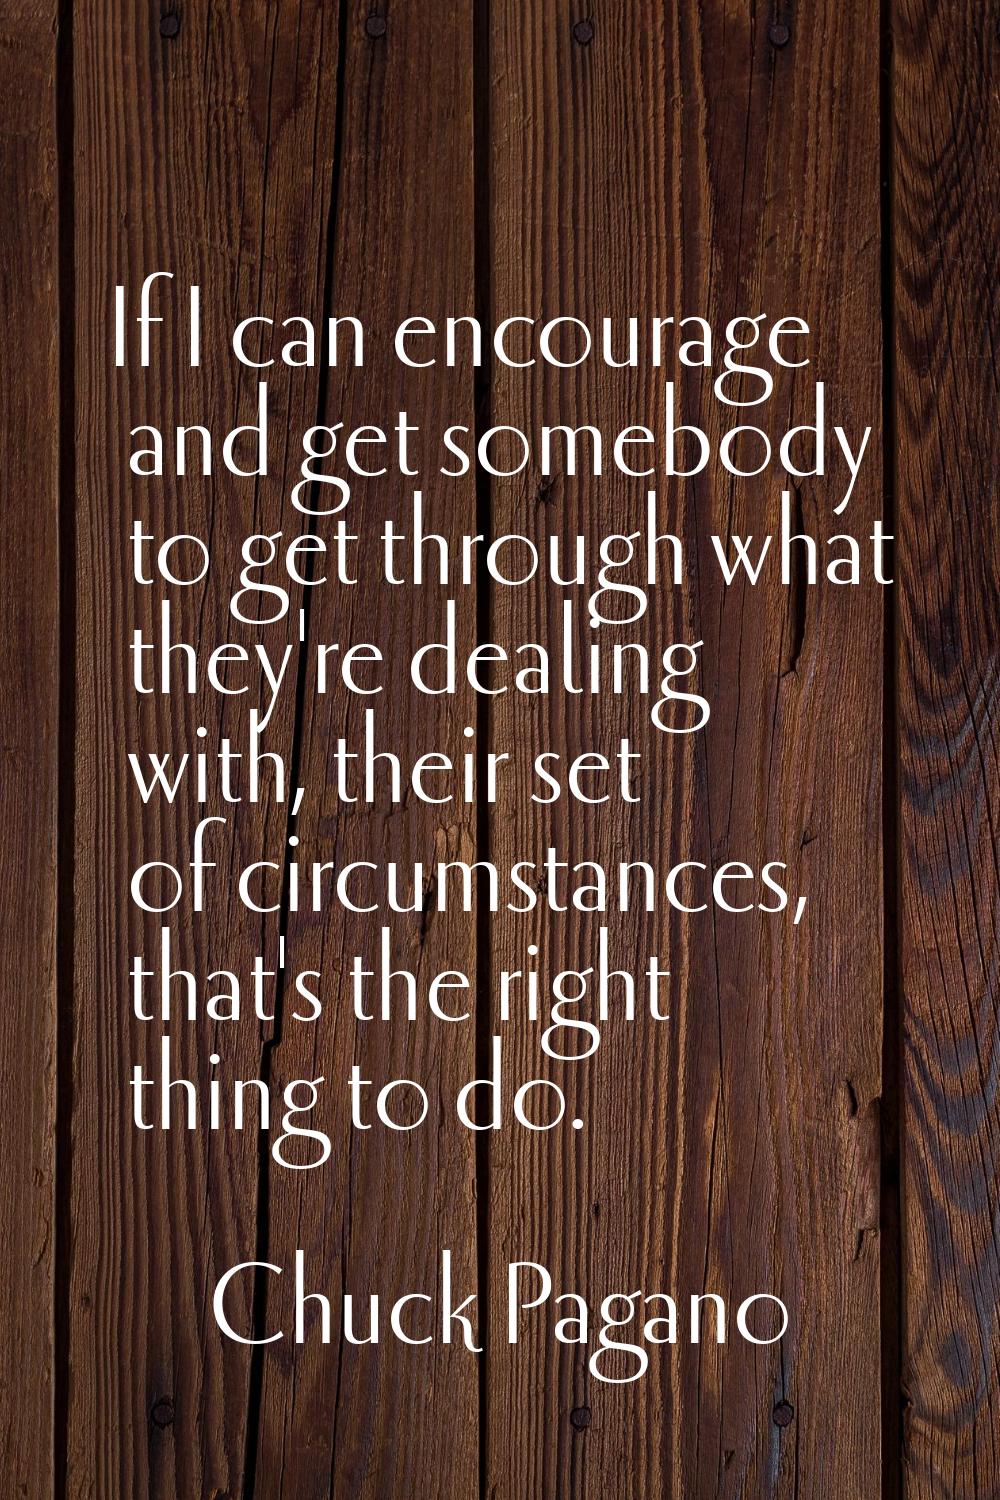 If I can encourage and get somebody to get through what they're dealing with, their set of circumst